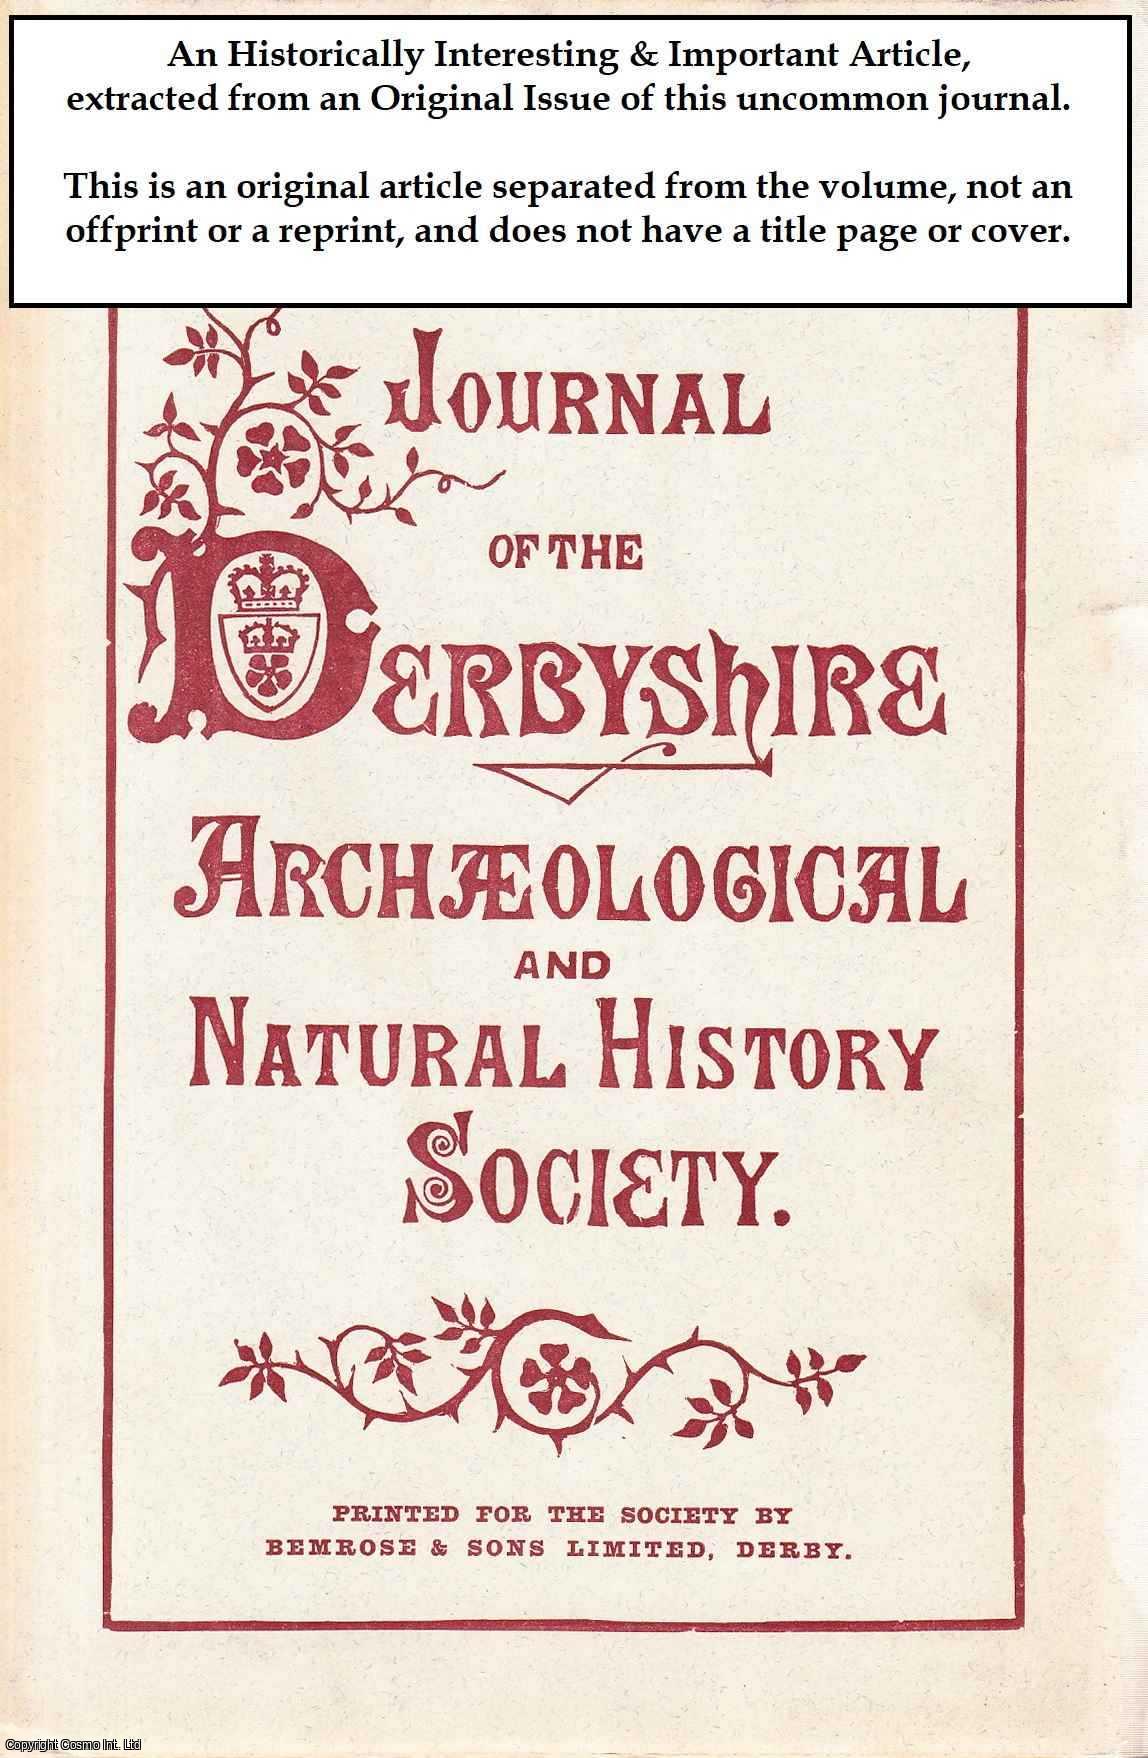 Francis C. R. Jourdain - The Ornithology of Derbyshire. An original article from the Journal of the Derbyshire Archaeological & Natural History Society, 1901.